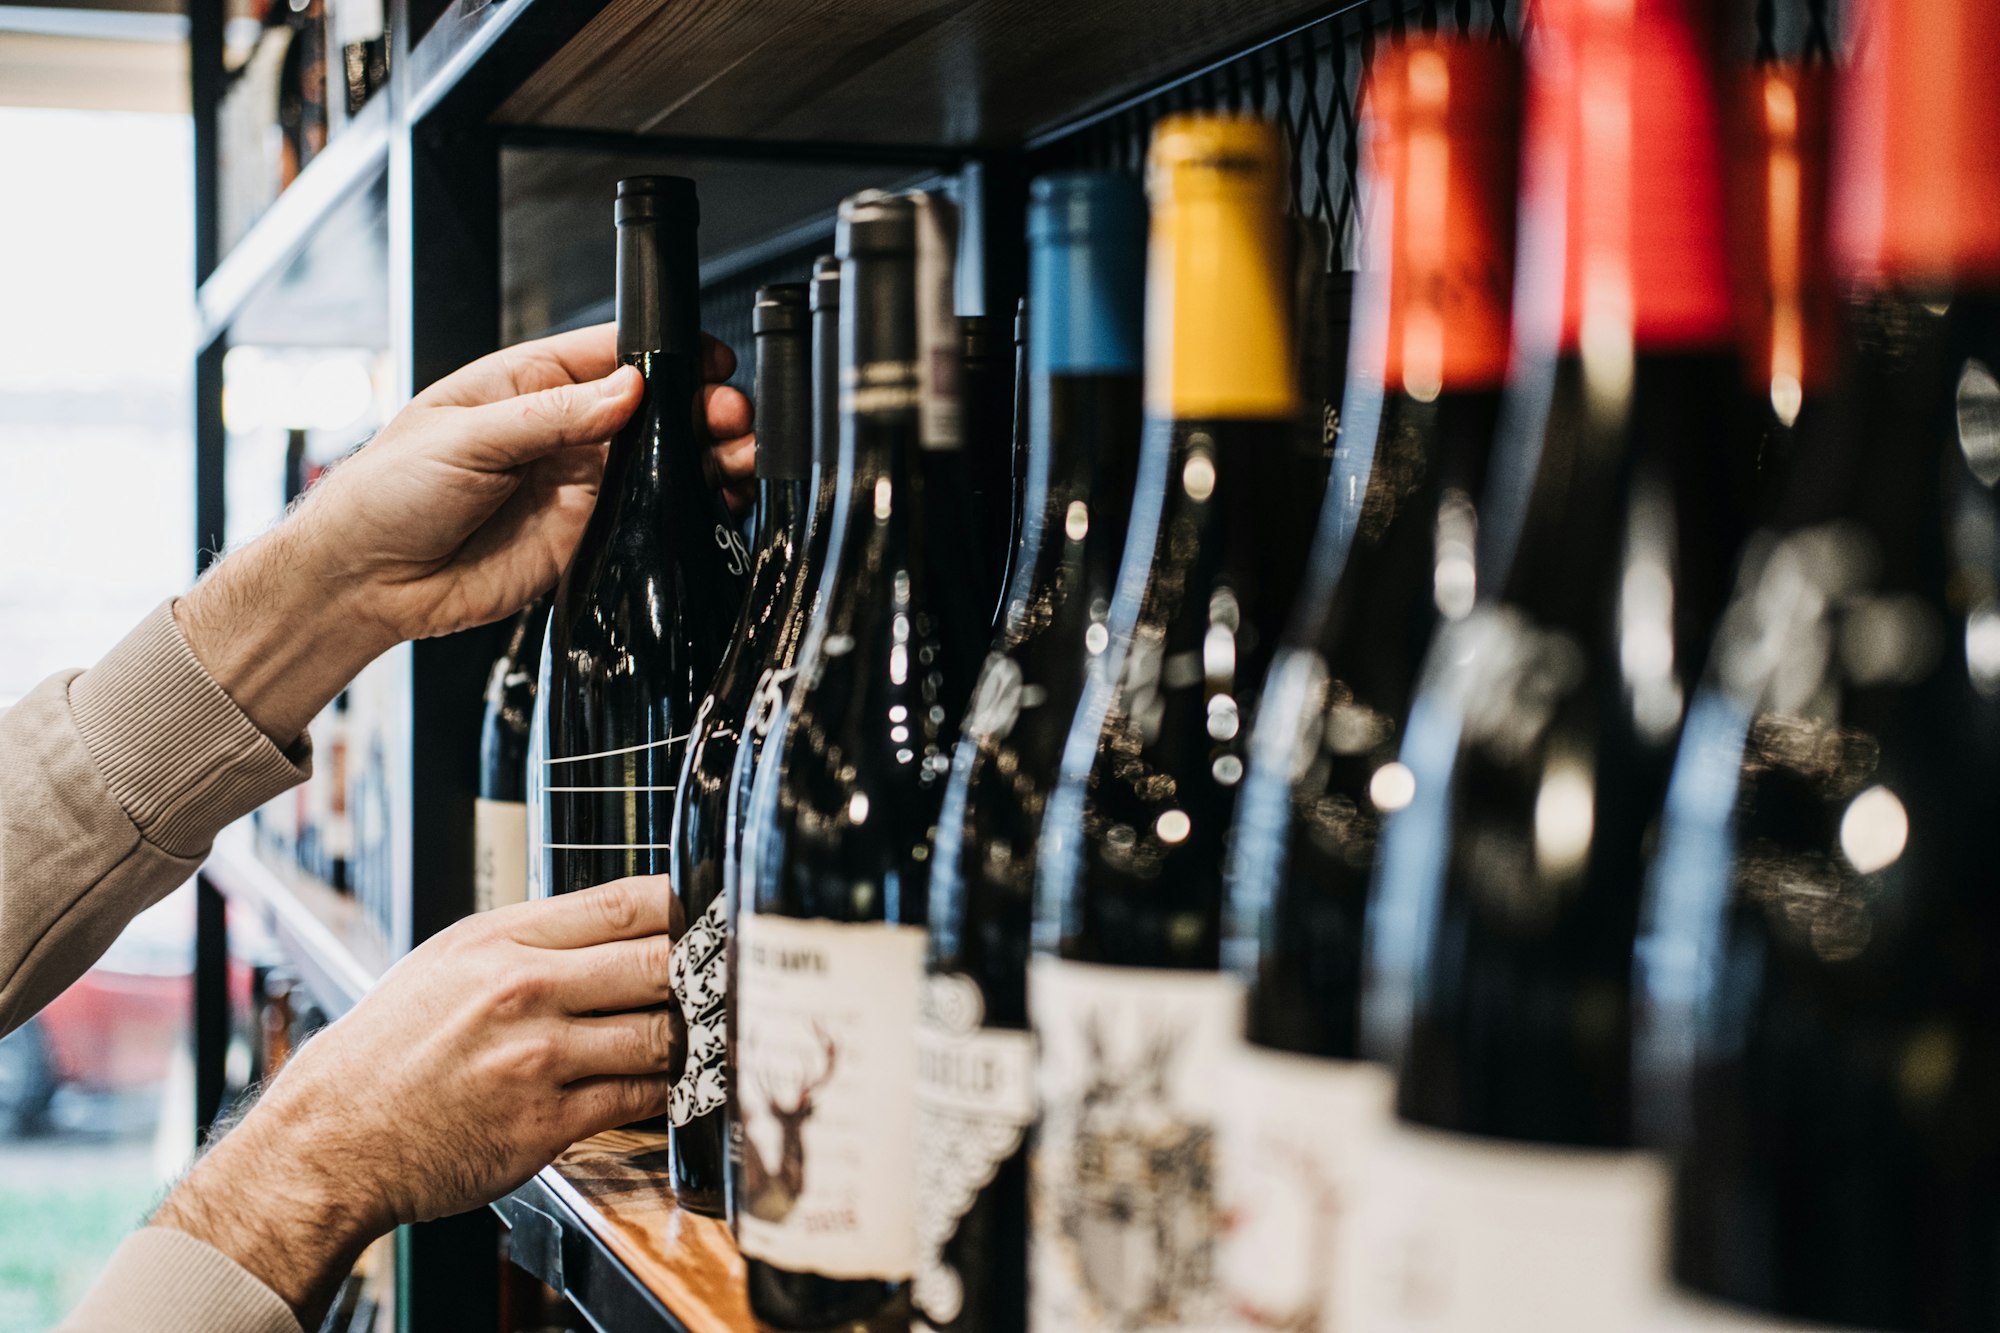 Customer Selecting Wine Bottle from Store Shelf. A person's hand picking a wine bottle from a